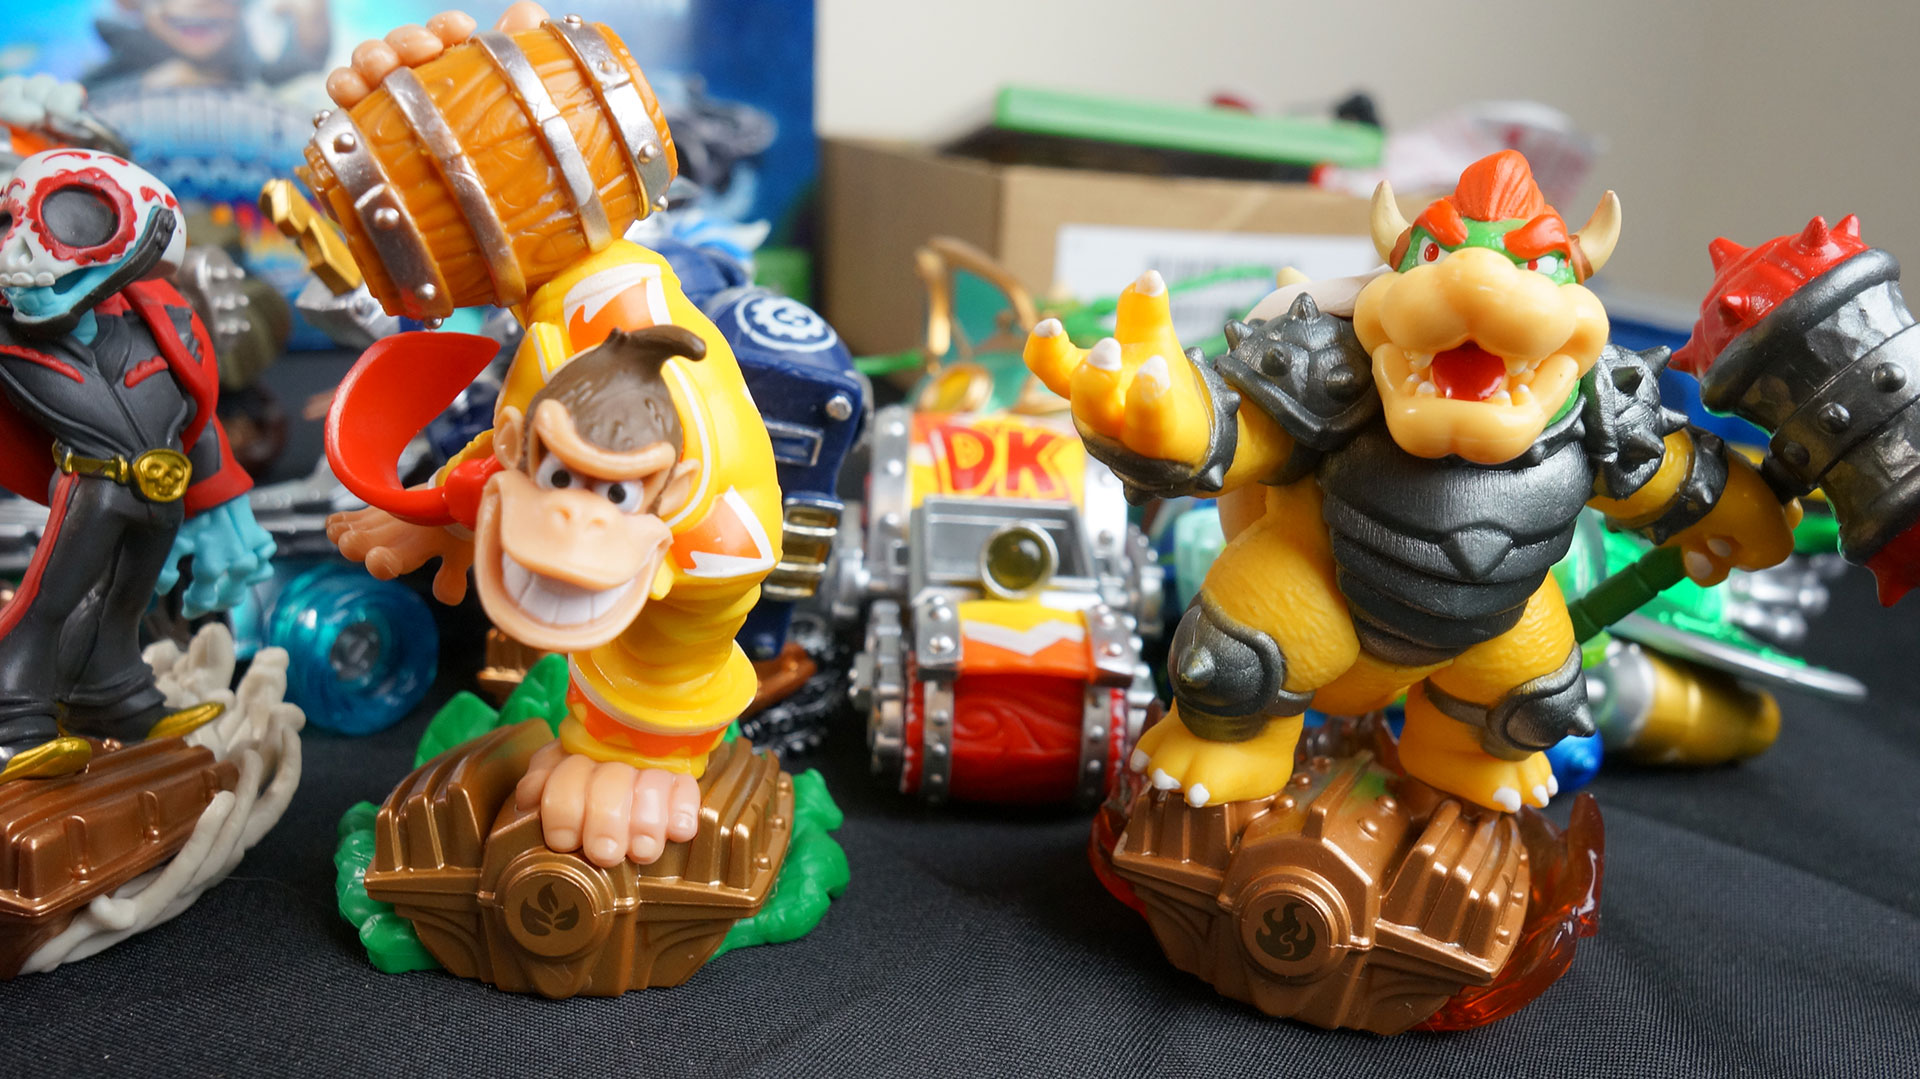 The Skylanders Superchargers Toys Are Mostly Great